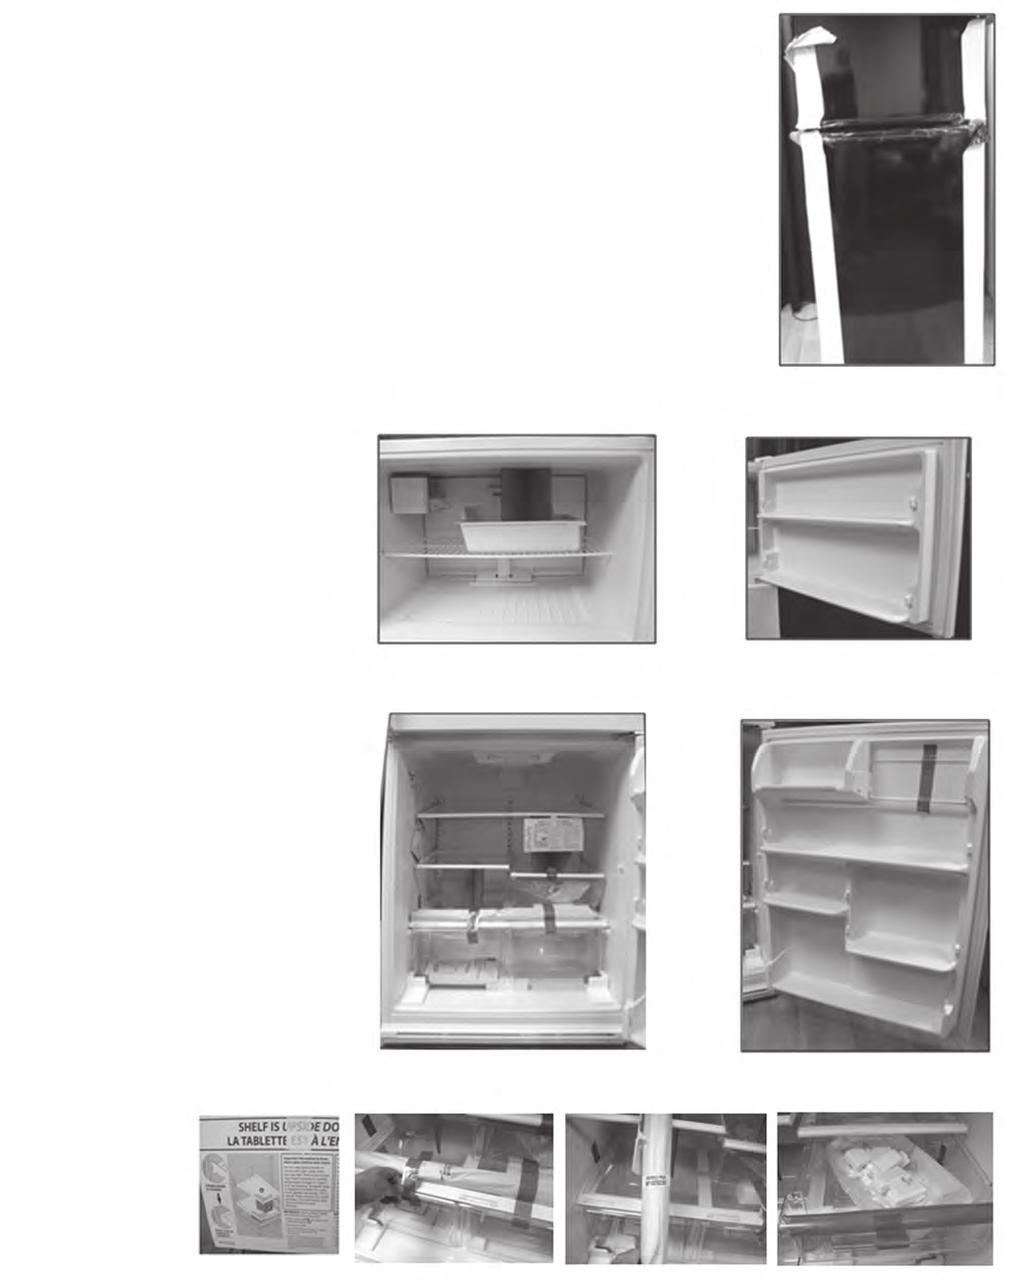 Installation Packaging Examples Exterior Packaging The exterior of a refrigerator is placed on a pallet, the corners covered with foam corner posts and then shrink wrapped